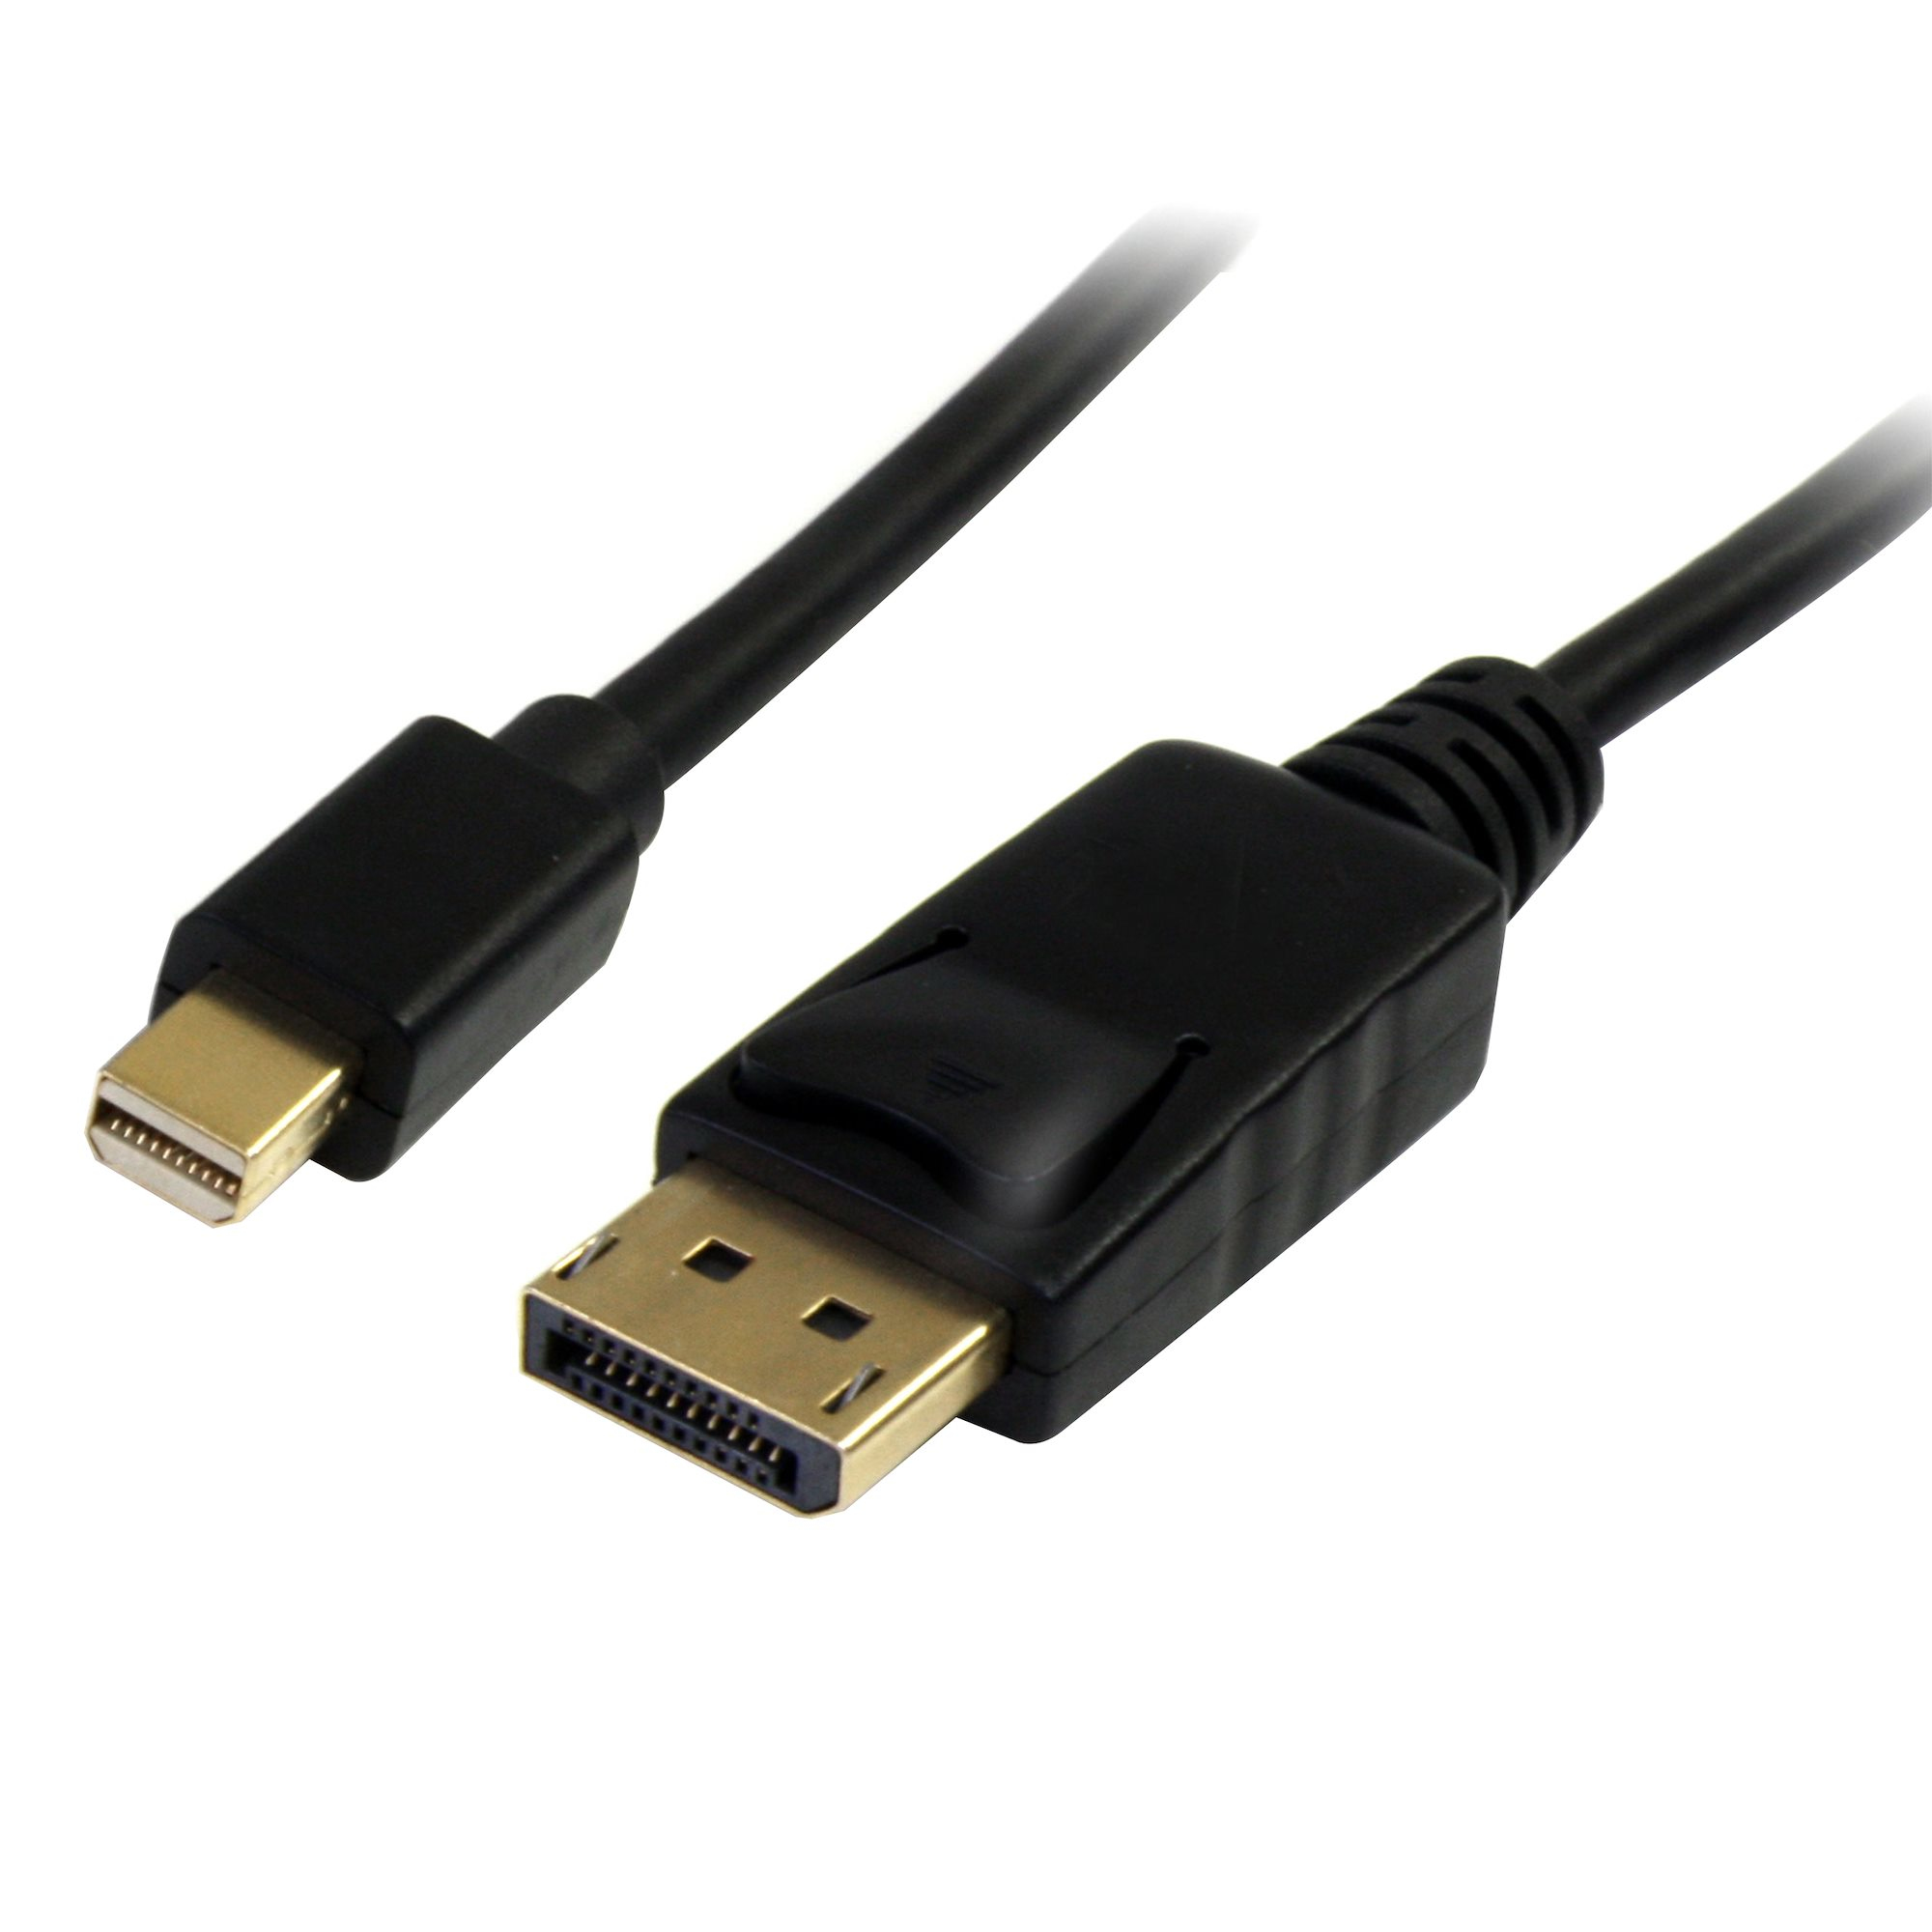 StarTech.com 2m (6ft) Mini DisplayPort to DisplayPort 1.2 Cable - 4K x 2K UHD Mini DisplayPort to DisplayPort Adapter Cable - Mini DP to DP Cable for Monitor - mDP to DP Converter Cord